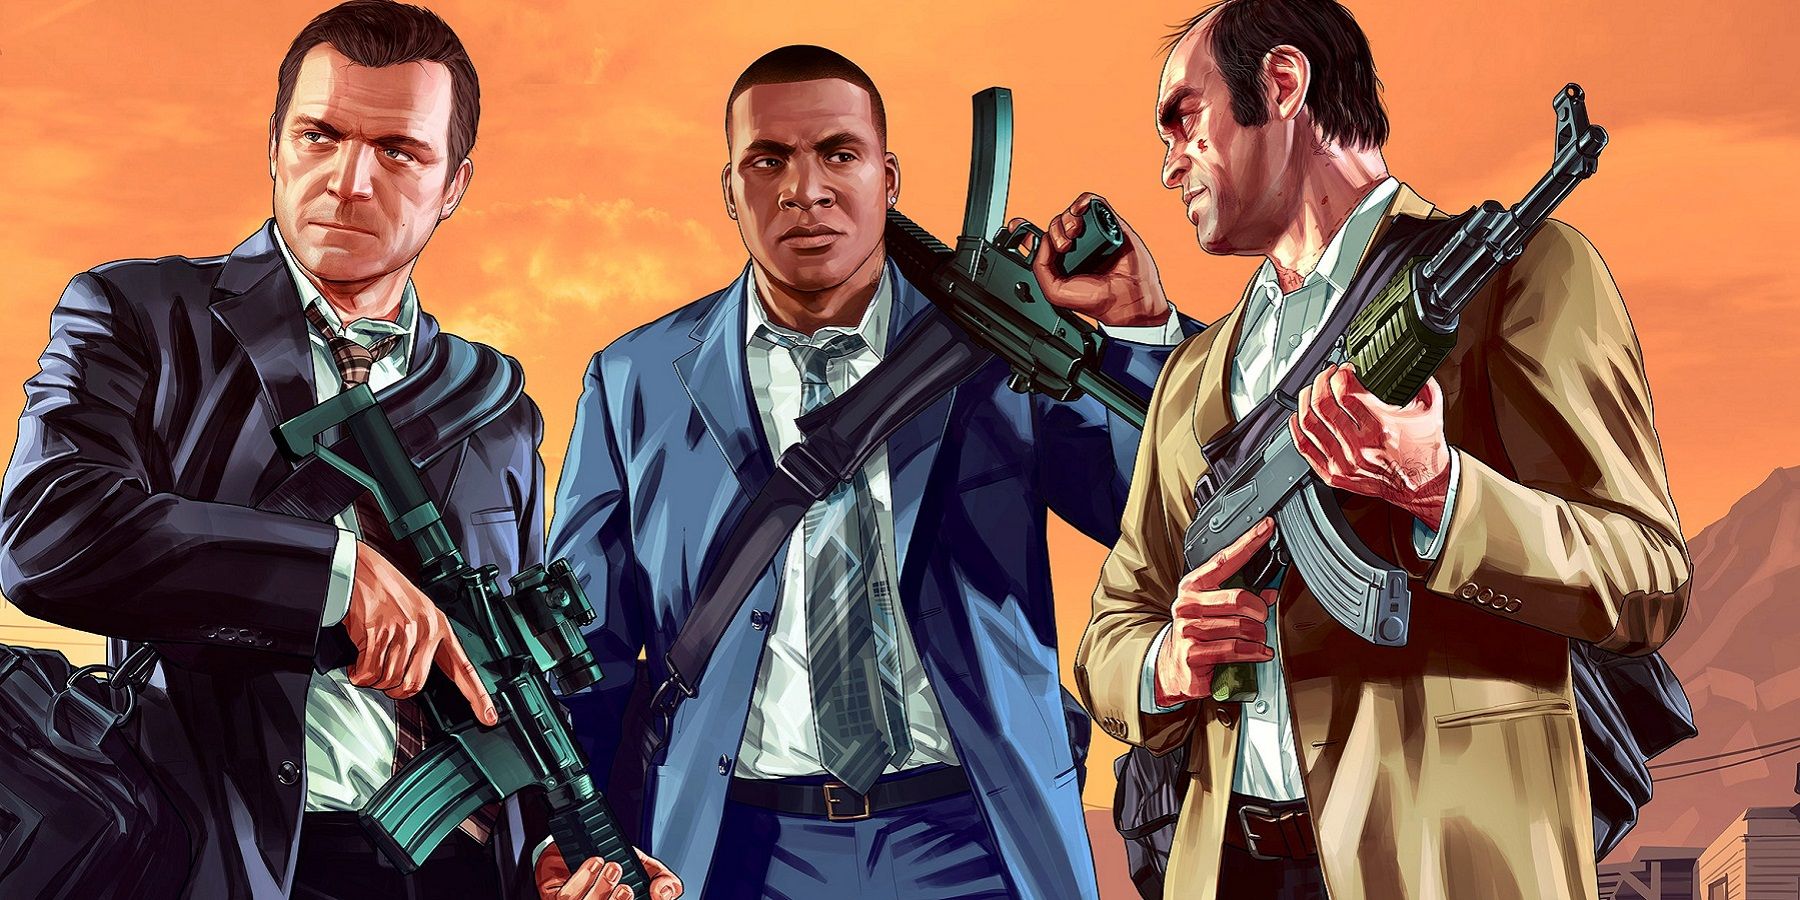 Image from Grand Theft Auto 5 showing Michael, Franklin, and Trevor, all donning suits and holding guns.